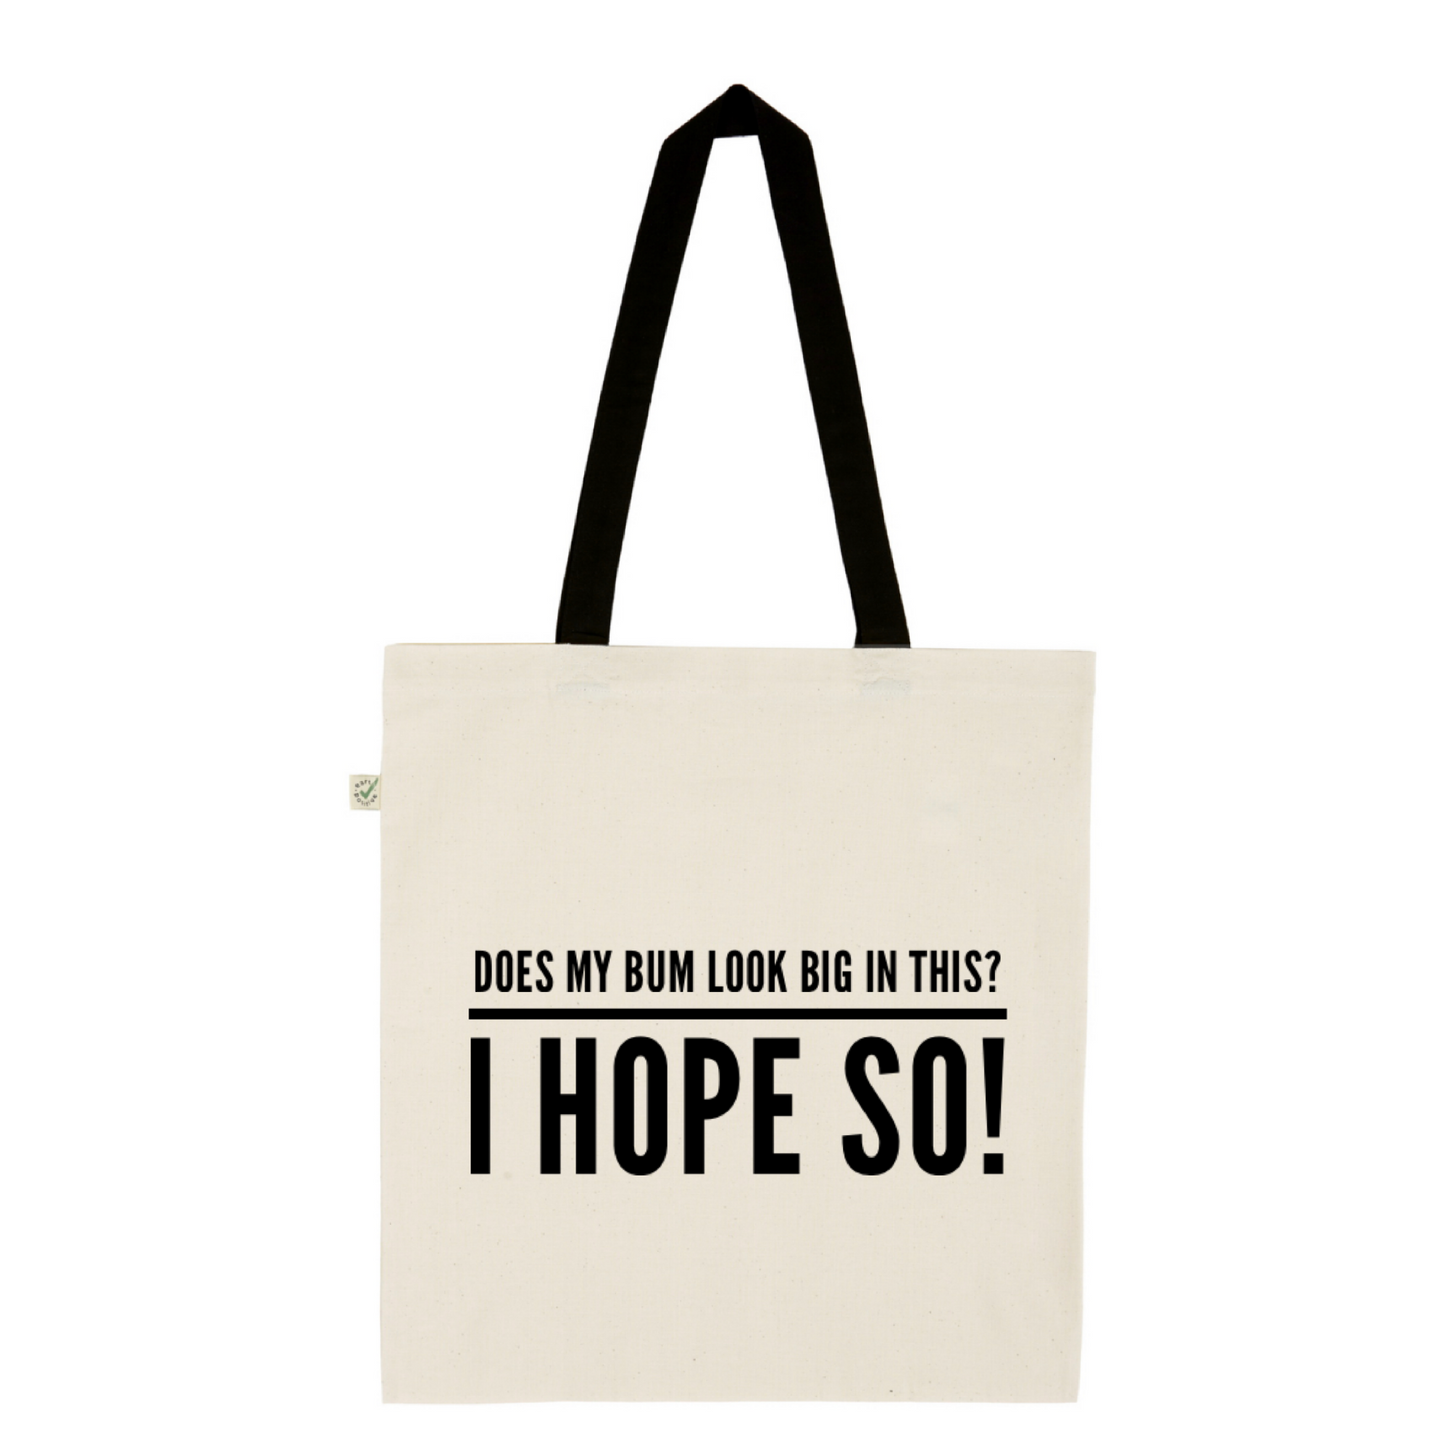 Does my bum look big in this? I hope so! - 100% organic cotton tote